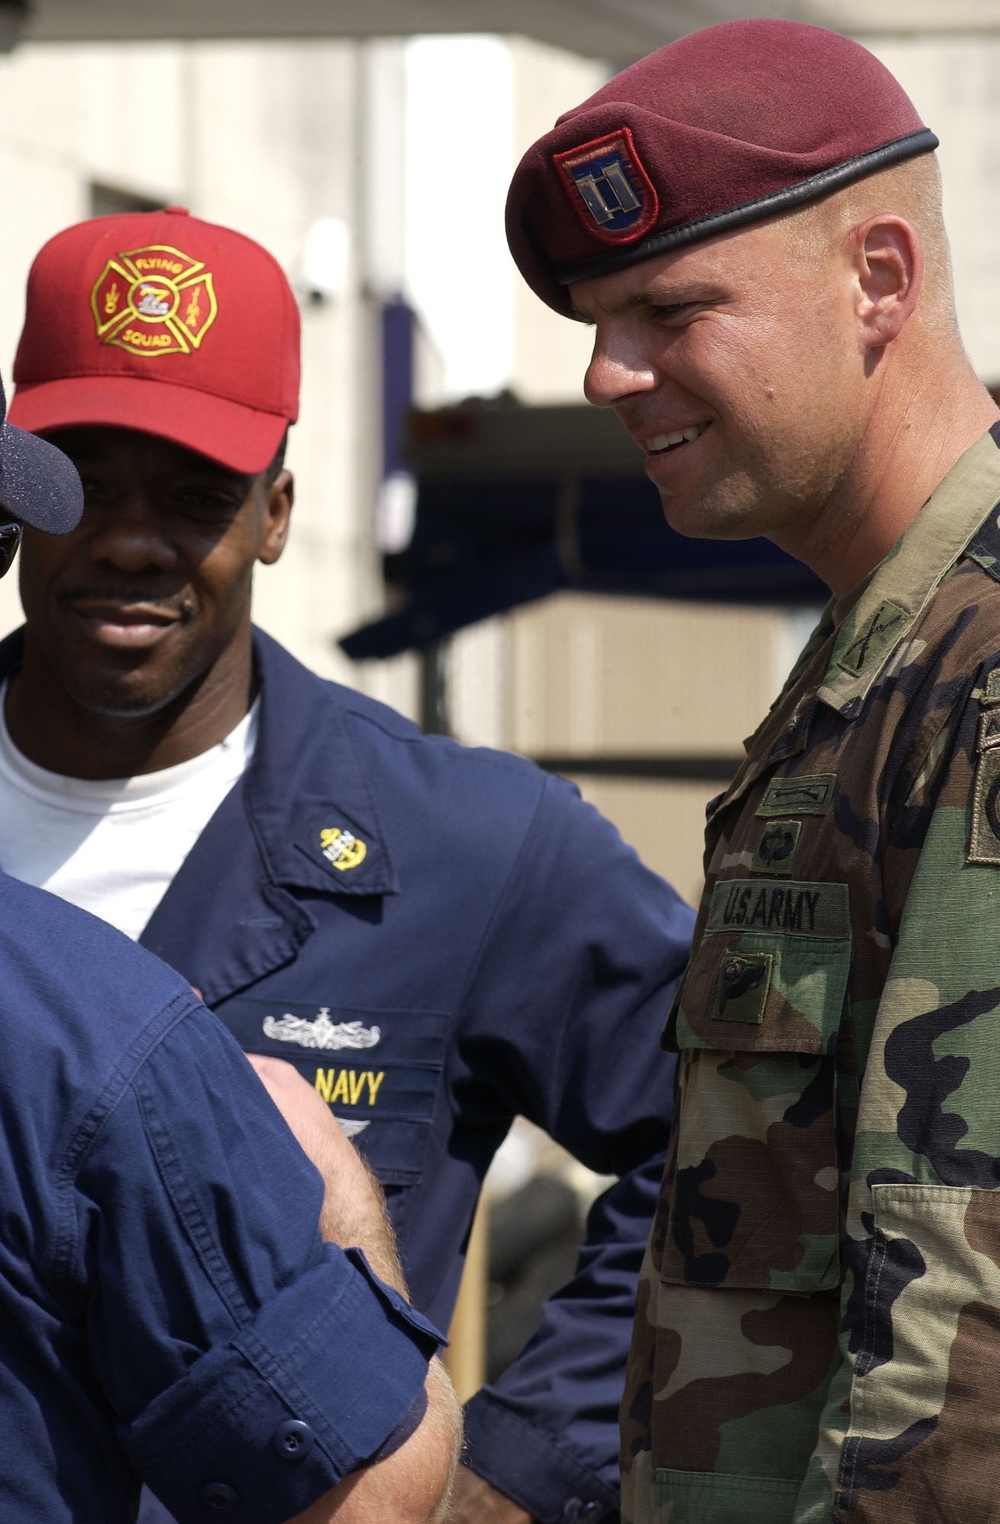 82nd Airborne and Navy work together